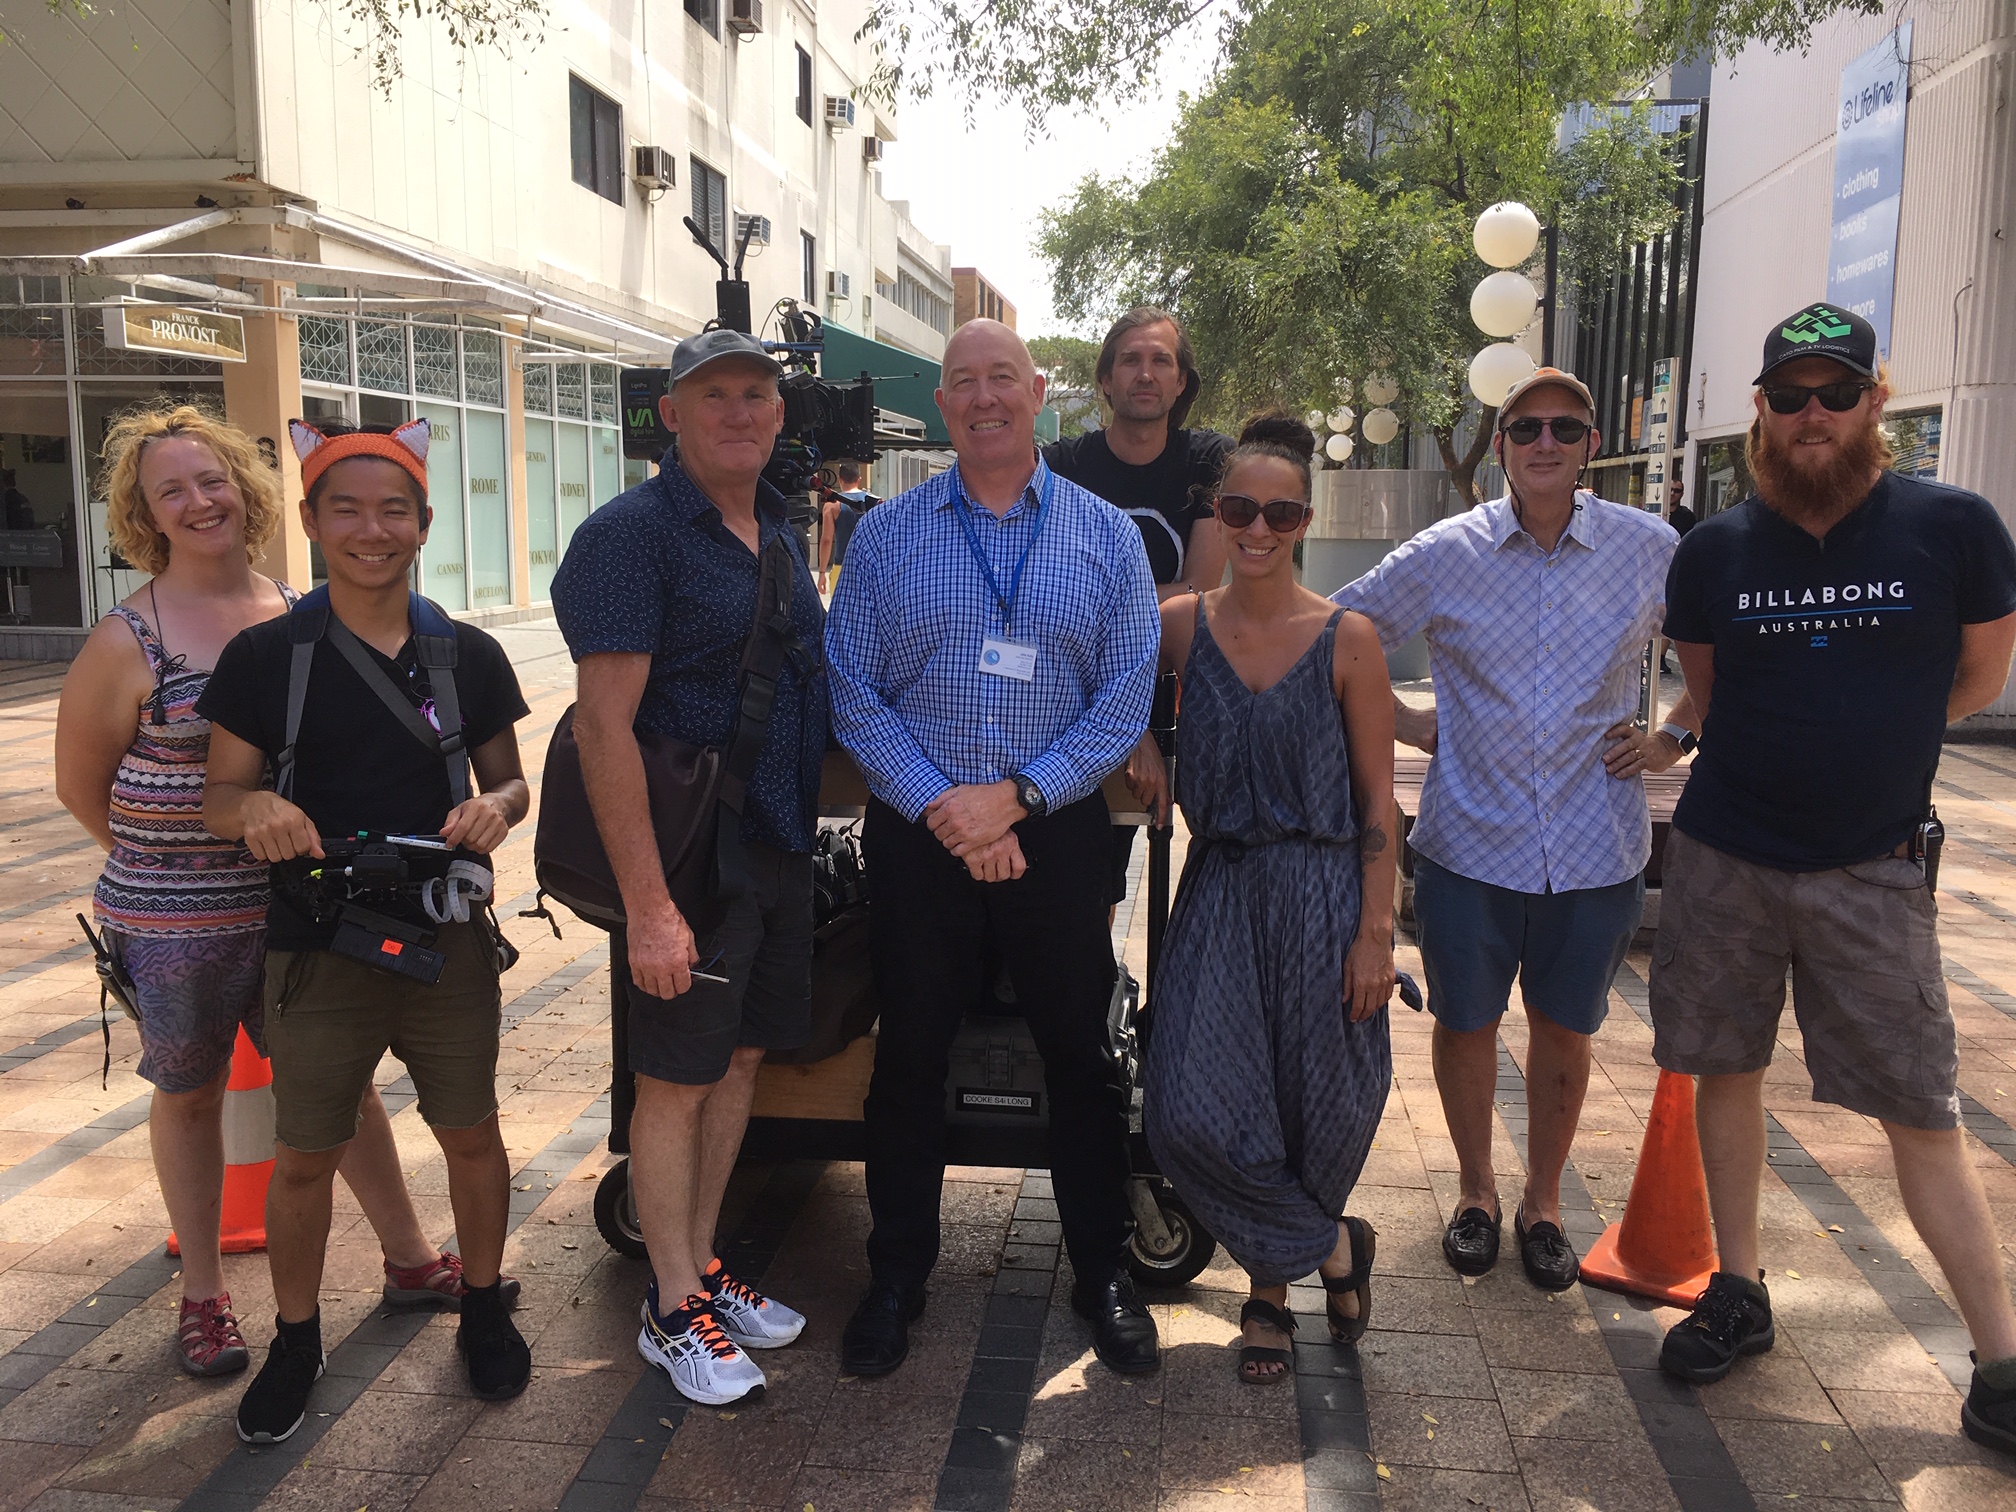 Pictured on location in Manly with Community Northern Beaches Executive Director John Kelly, is Director Ian Watson on Johnâ€™s right, and Location Manager Daniella on Johnâ€™s left, plus crew.